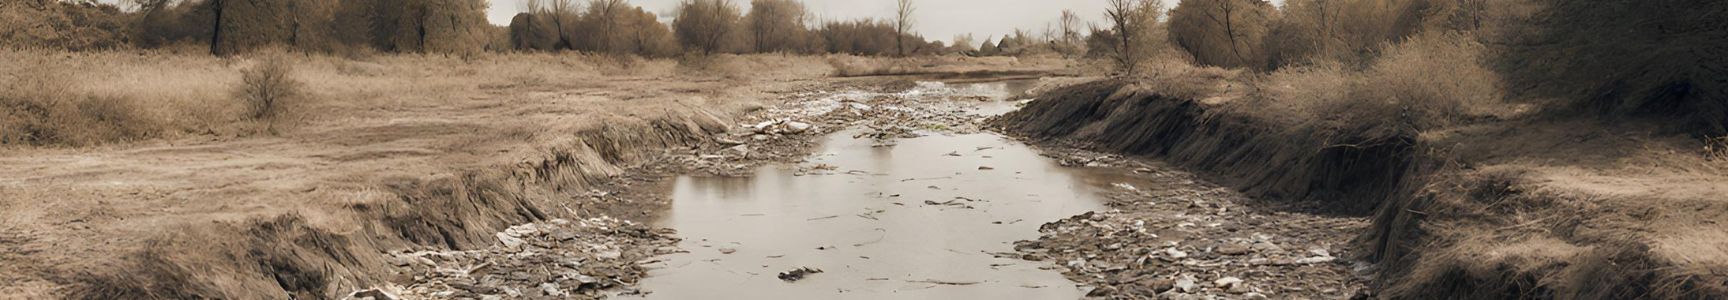 Dry riverbeds post challenges for clean water sources